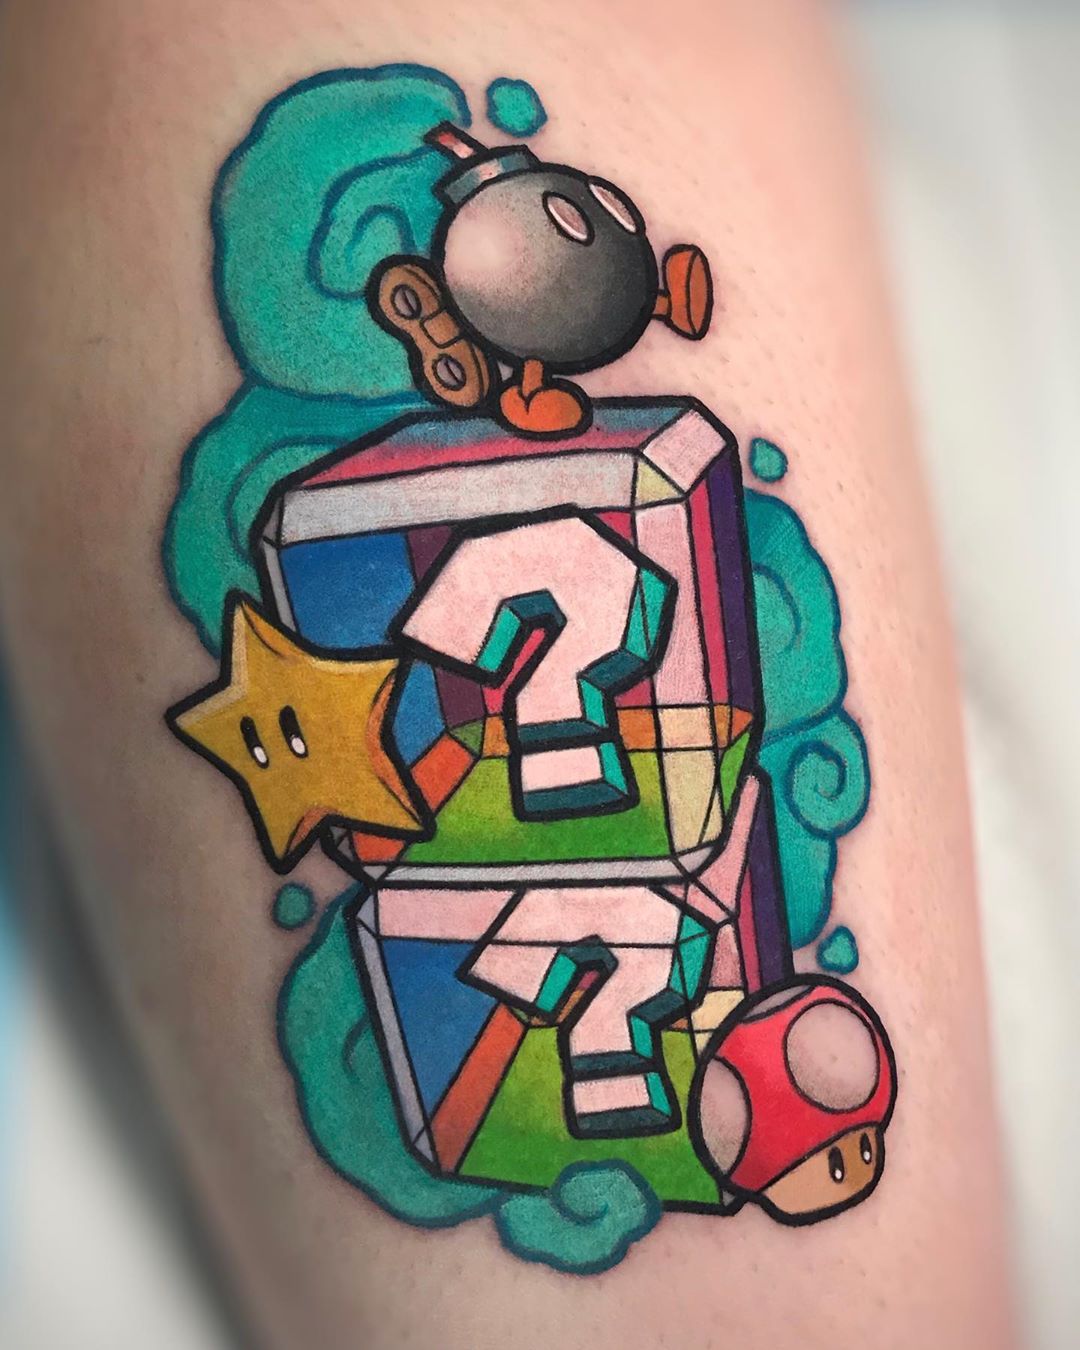 Fantasy Calf Super Mario Tattoo by Spilled Ink Tattoo